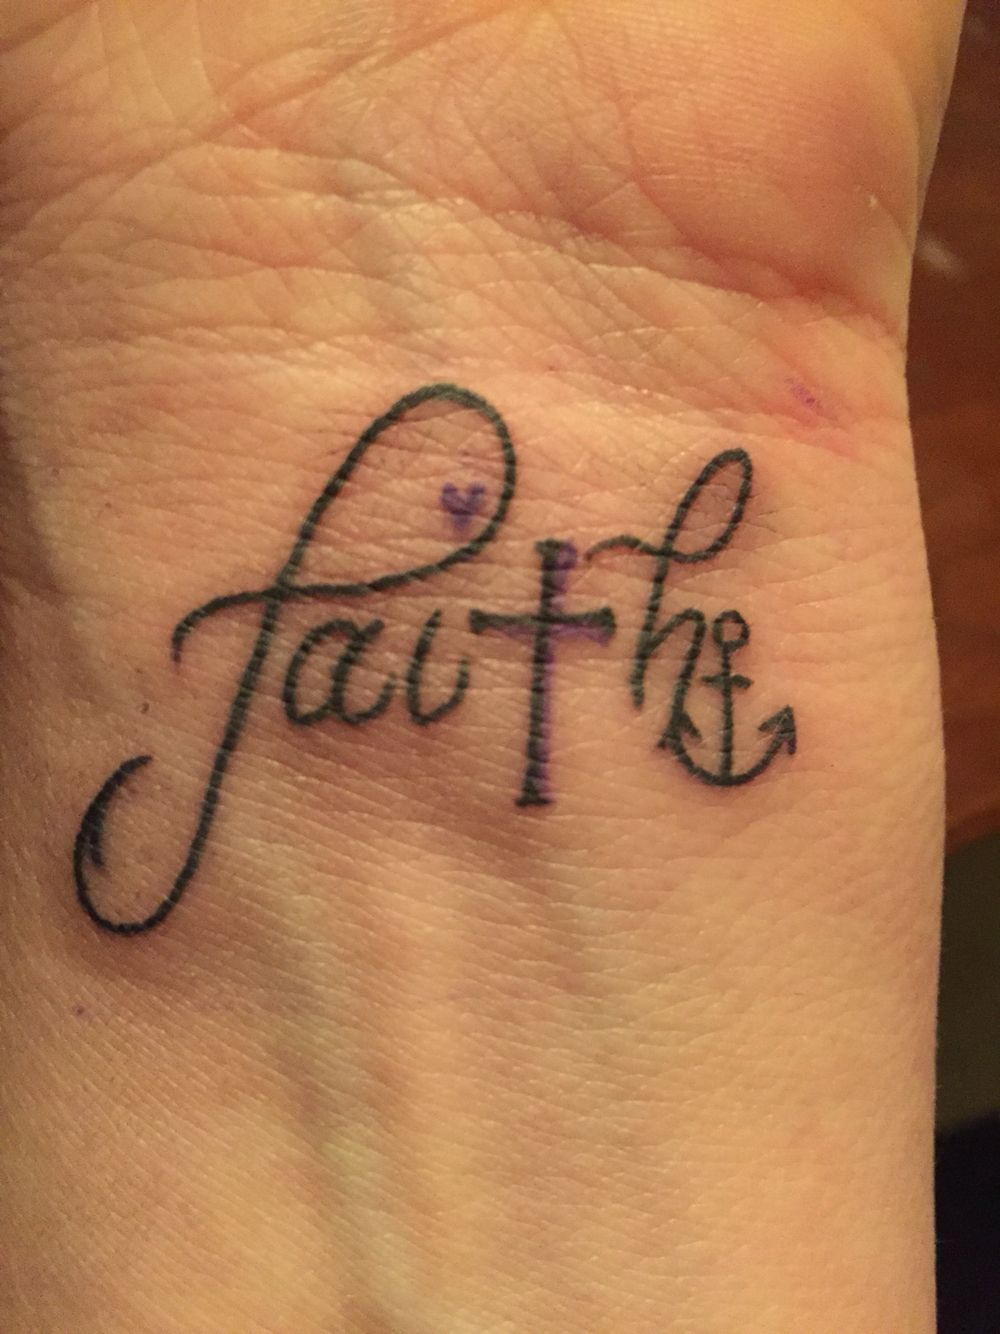 14 Faith Tattoos To Get Inspired Tattoo Me Now with regard to dimensions 1000 X 1334